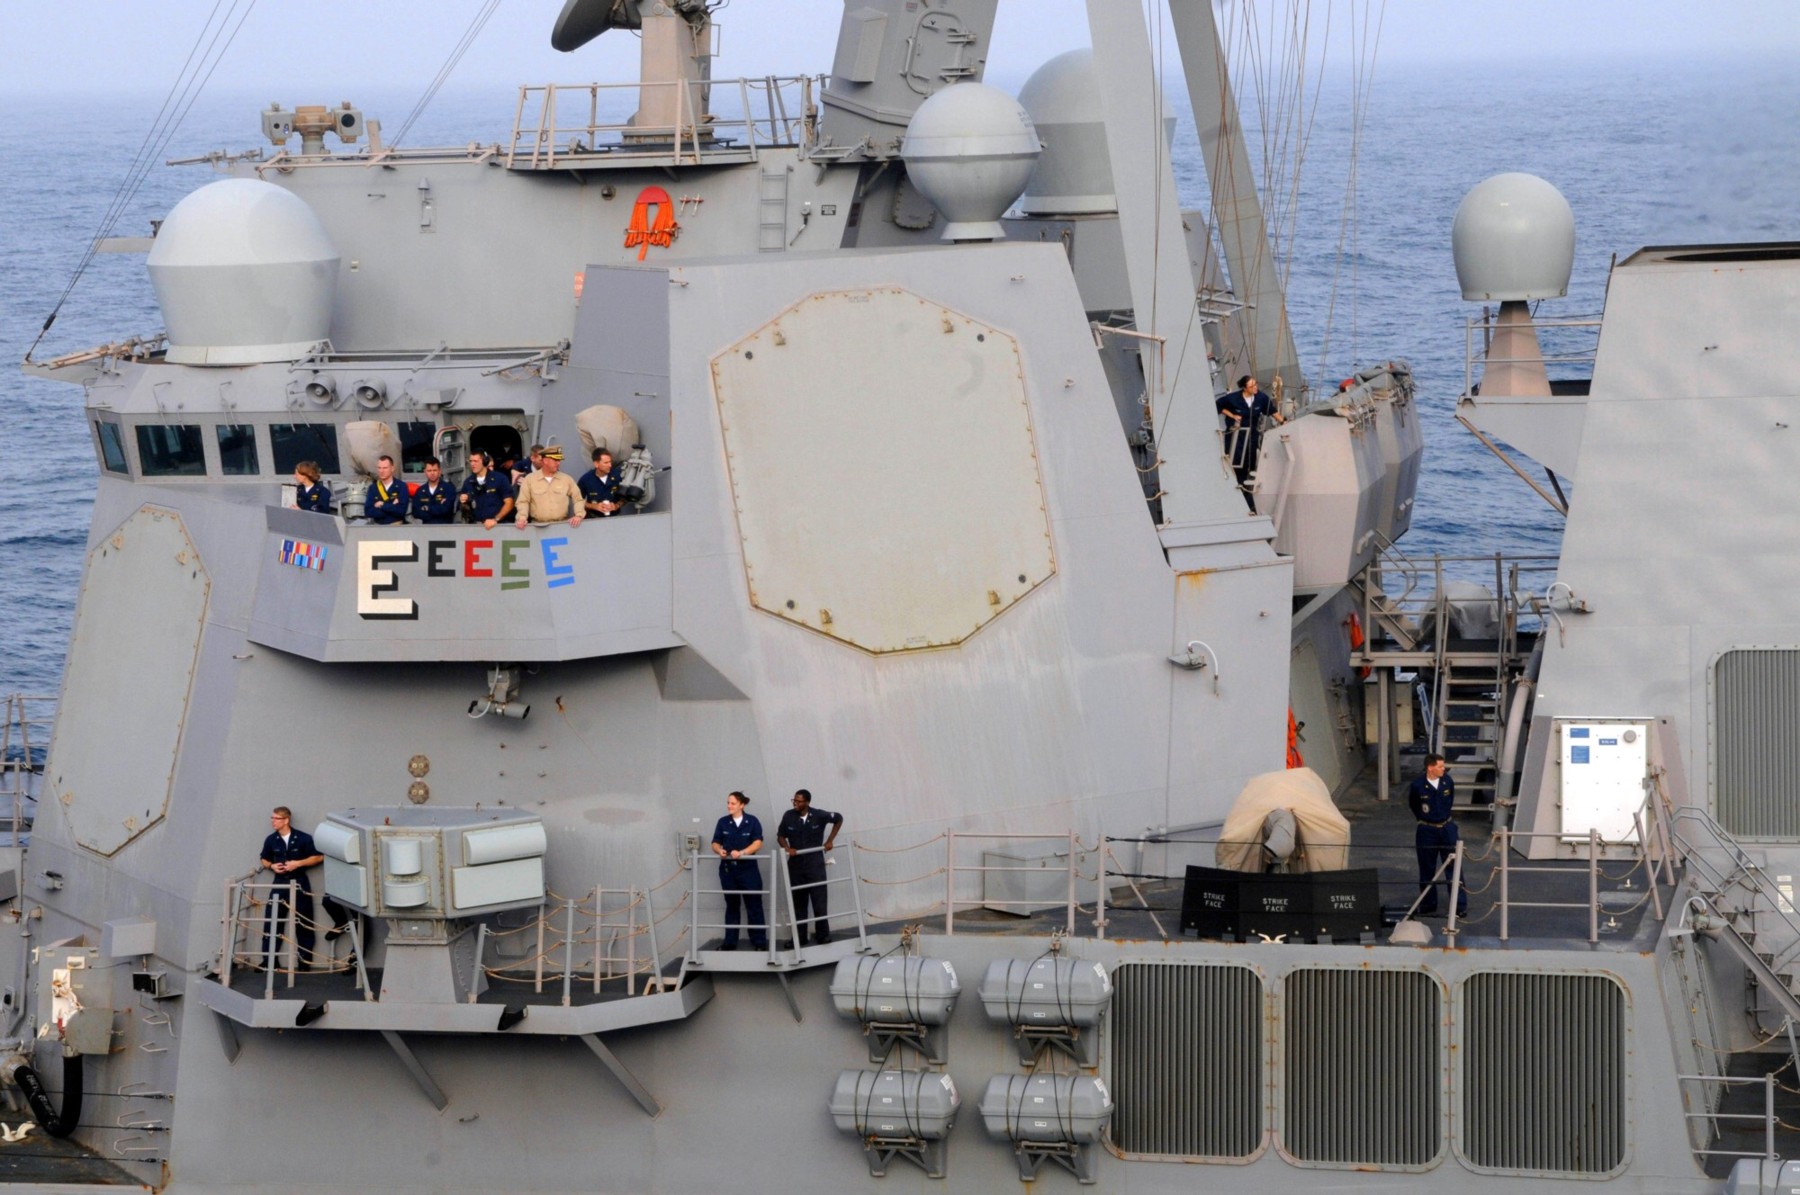 ddg-101 uss gridley arleigh burke class guided missile destroyer aegis us navy 36